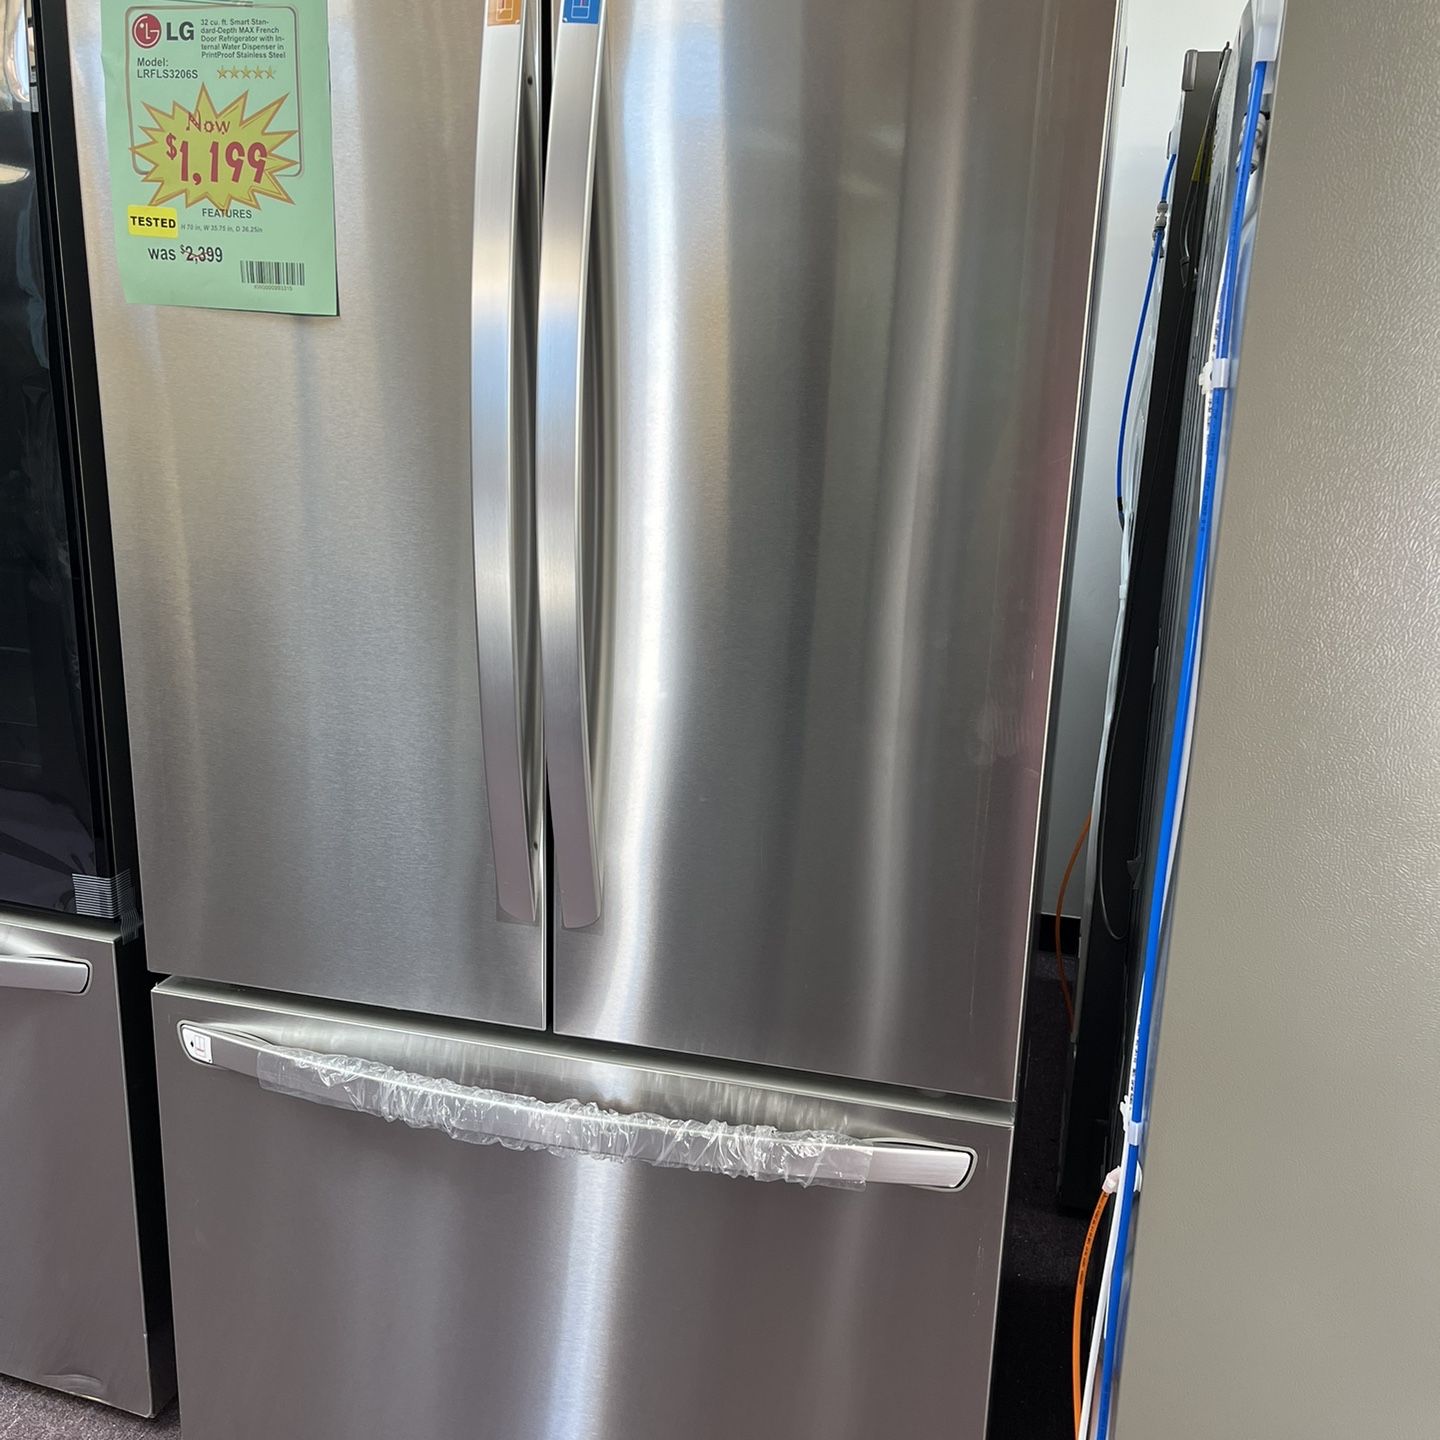 Refrigerator-LG Open Box 36’ Refrigerator With 1 Year Warranty Delivery Service 